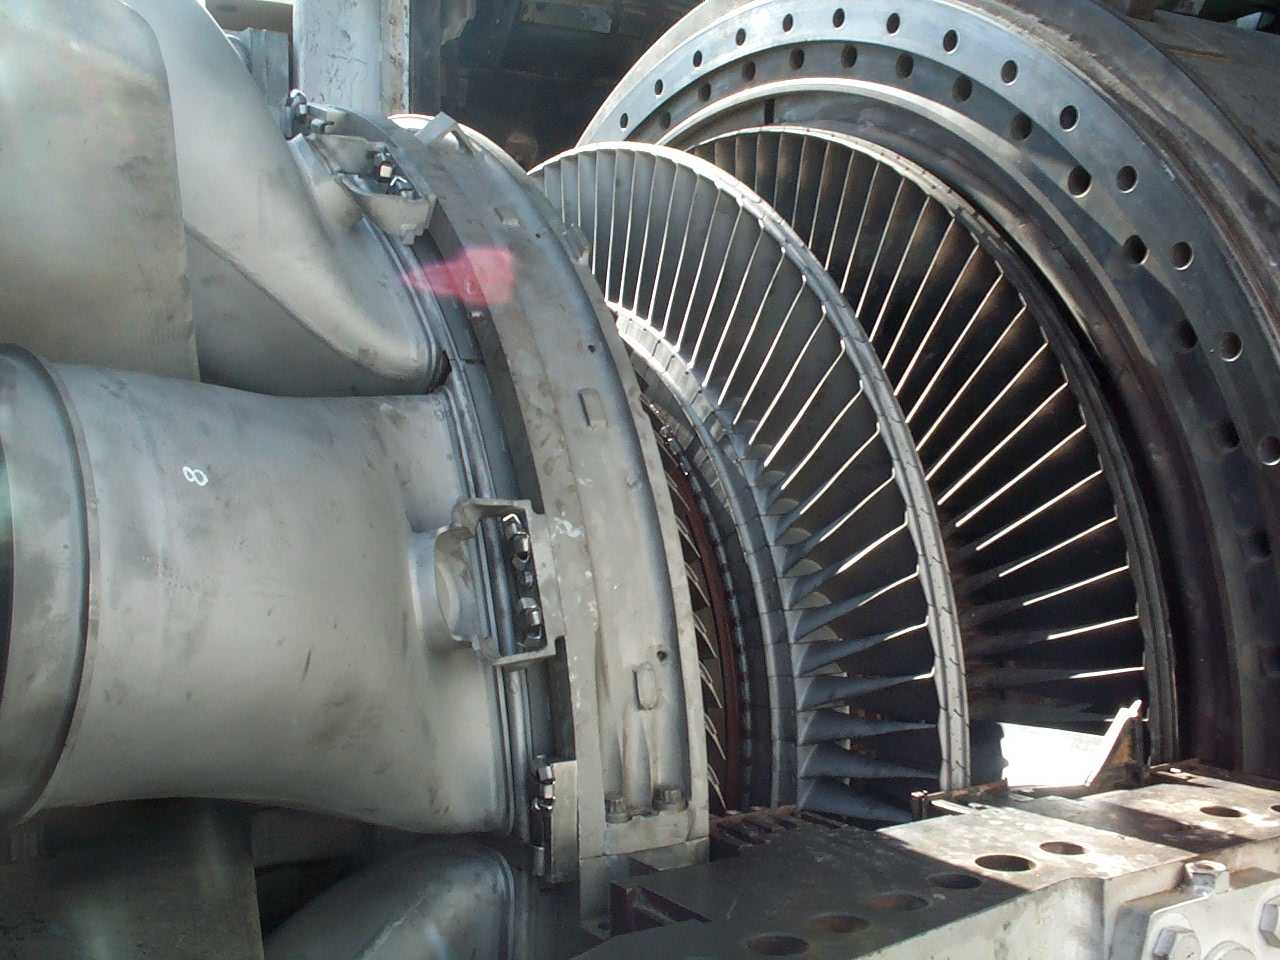 To meet the new emissions standard, it was clear the turbine required a retrofit solution.